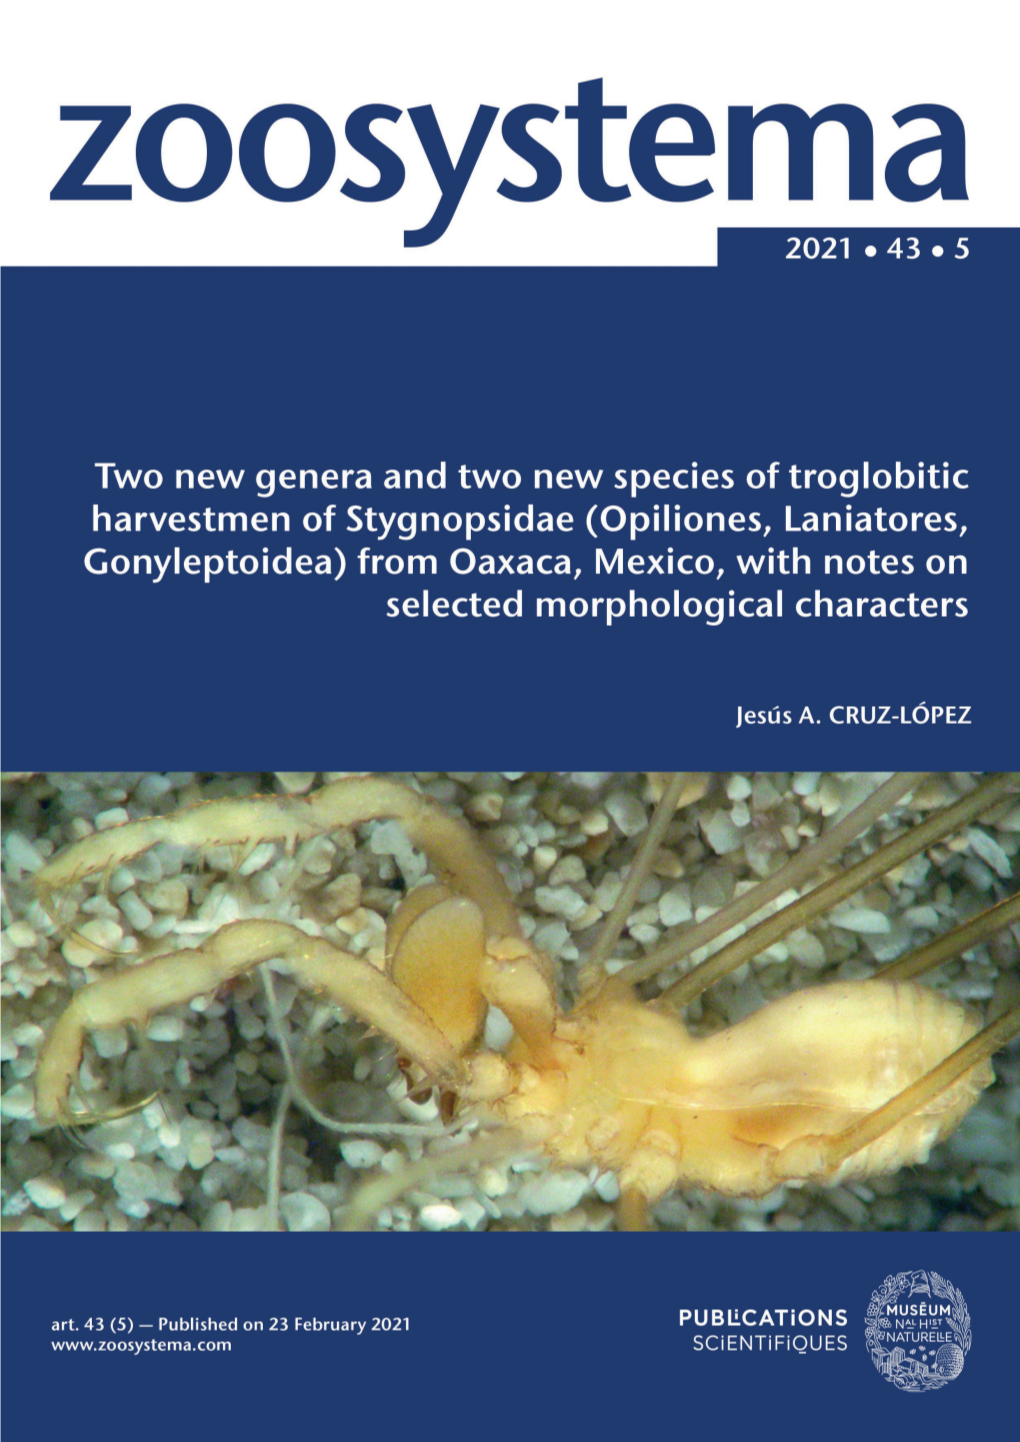 Opiliones, Laniatores, Gonyleptoidea) from Oaxaca, Mexico, with Notes on Selected Morphological Characters